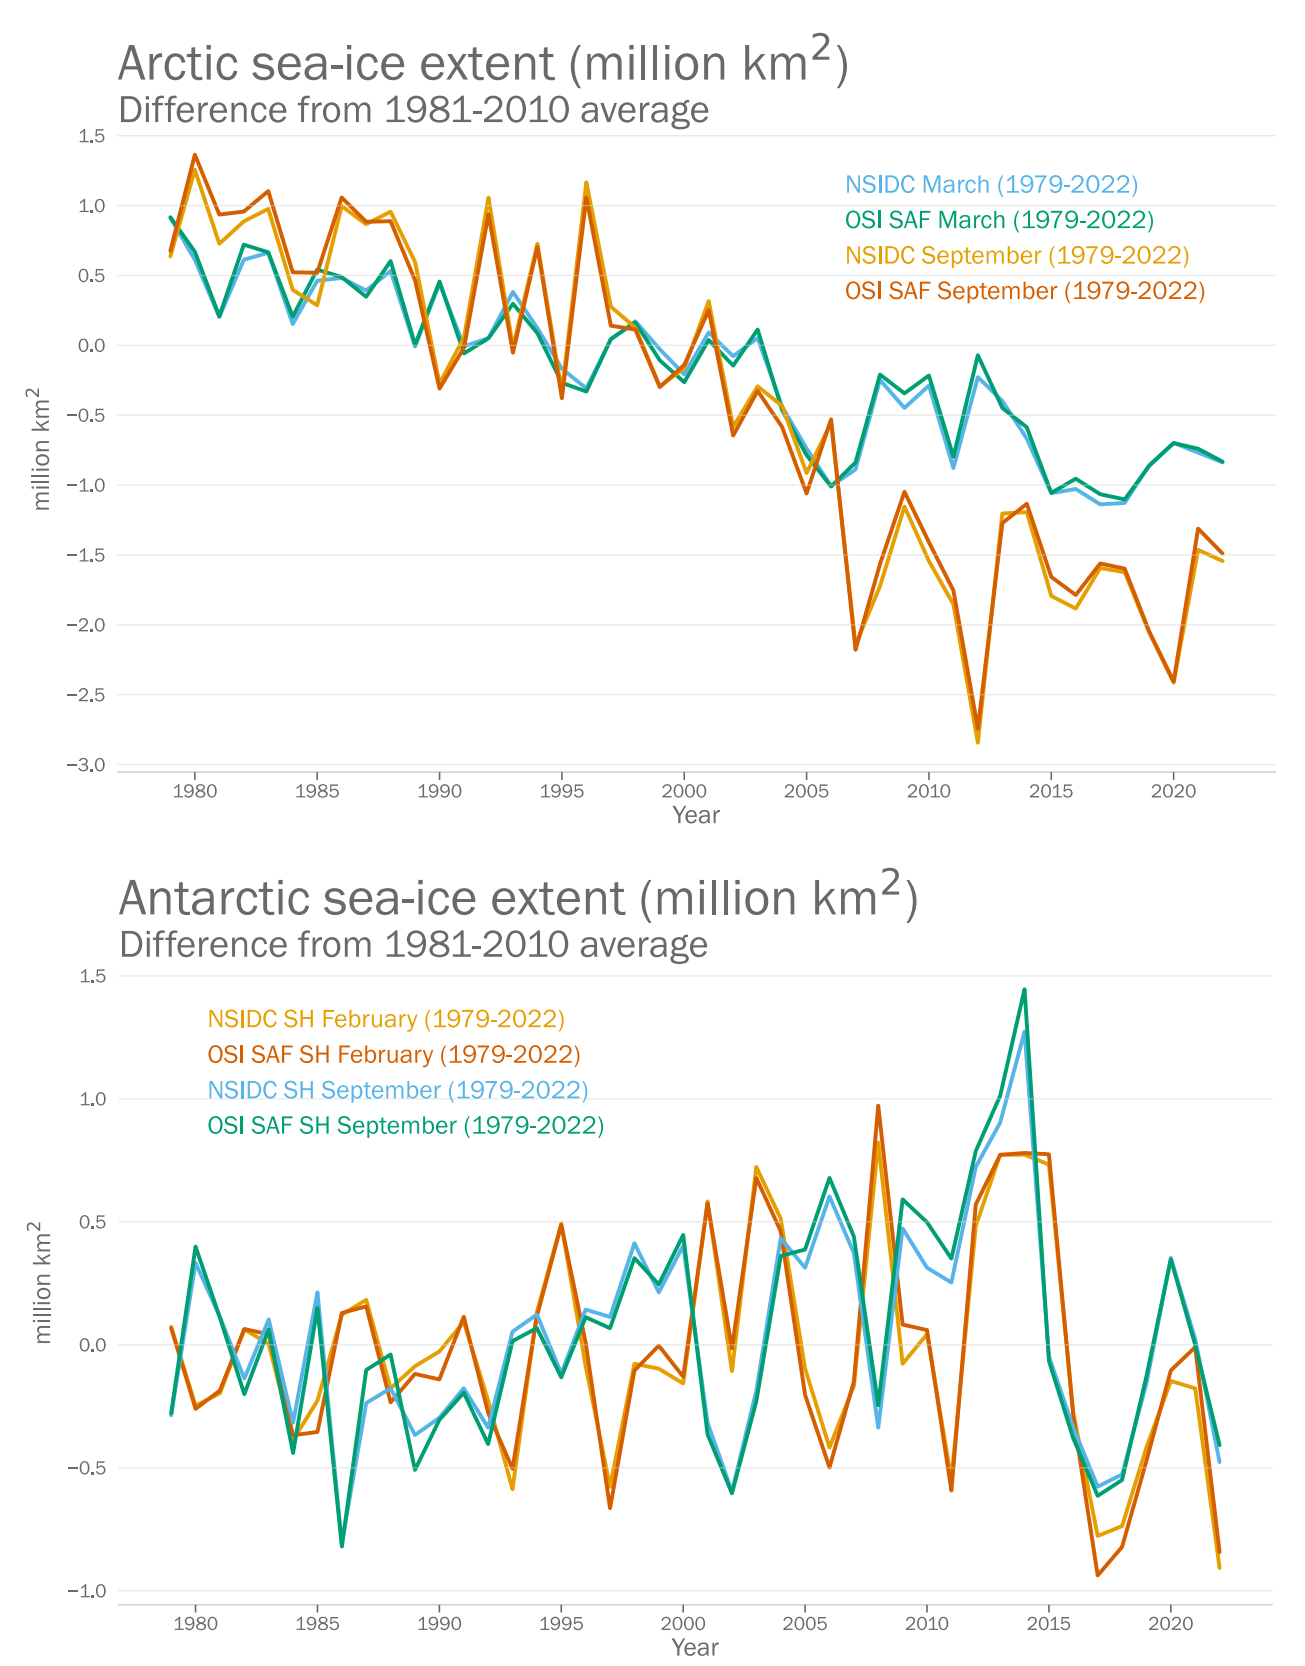 Sea ice extent anomalies, 1979-2022, relative to the 1981-2010 average for (top) the Arctic and (bottom) the Antarctic. Blue/green lines indicate the anomalies in annual maximum ice extent (March for the Arctic and September for the Antarctic) and orange/red correspond to the annual minimum ice extent (September for the Arctic and February for the Antarctic). Arctic sea-ice extent was below the long-term (1981-2010) average for most of the year, with a Spring sea-ice maximum of 14.59 million km2 in March 2022, 0.84 million km2 below the long-term mean. The September extent was 4.87 million km2, 1.54 million km2 below the long-term mean extent. This represents greater ice extent than the average minimum values of the last decade – a moderate summer for Arctic sea-ice melt – but it is tied for the 11th lowest monthly minimum ice extent in the satellite record. The smallest daily extent of the year, 4.67 million km2, occurred around 18 September 2022 and was the 9th or 10th lowest annual-minimum daily extent on record. Data: EUMETSAT OSI SAF v2p1 and National Snow and Ice Data Centre (NSIDC) v3 / Fetterer et al., 2017. Graphic: WMO